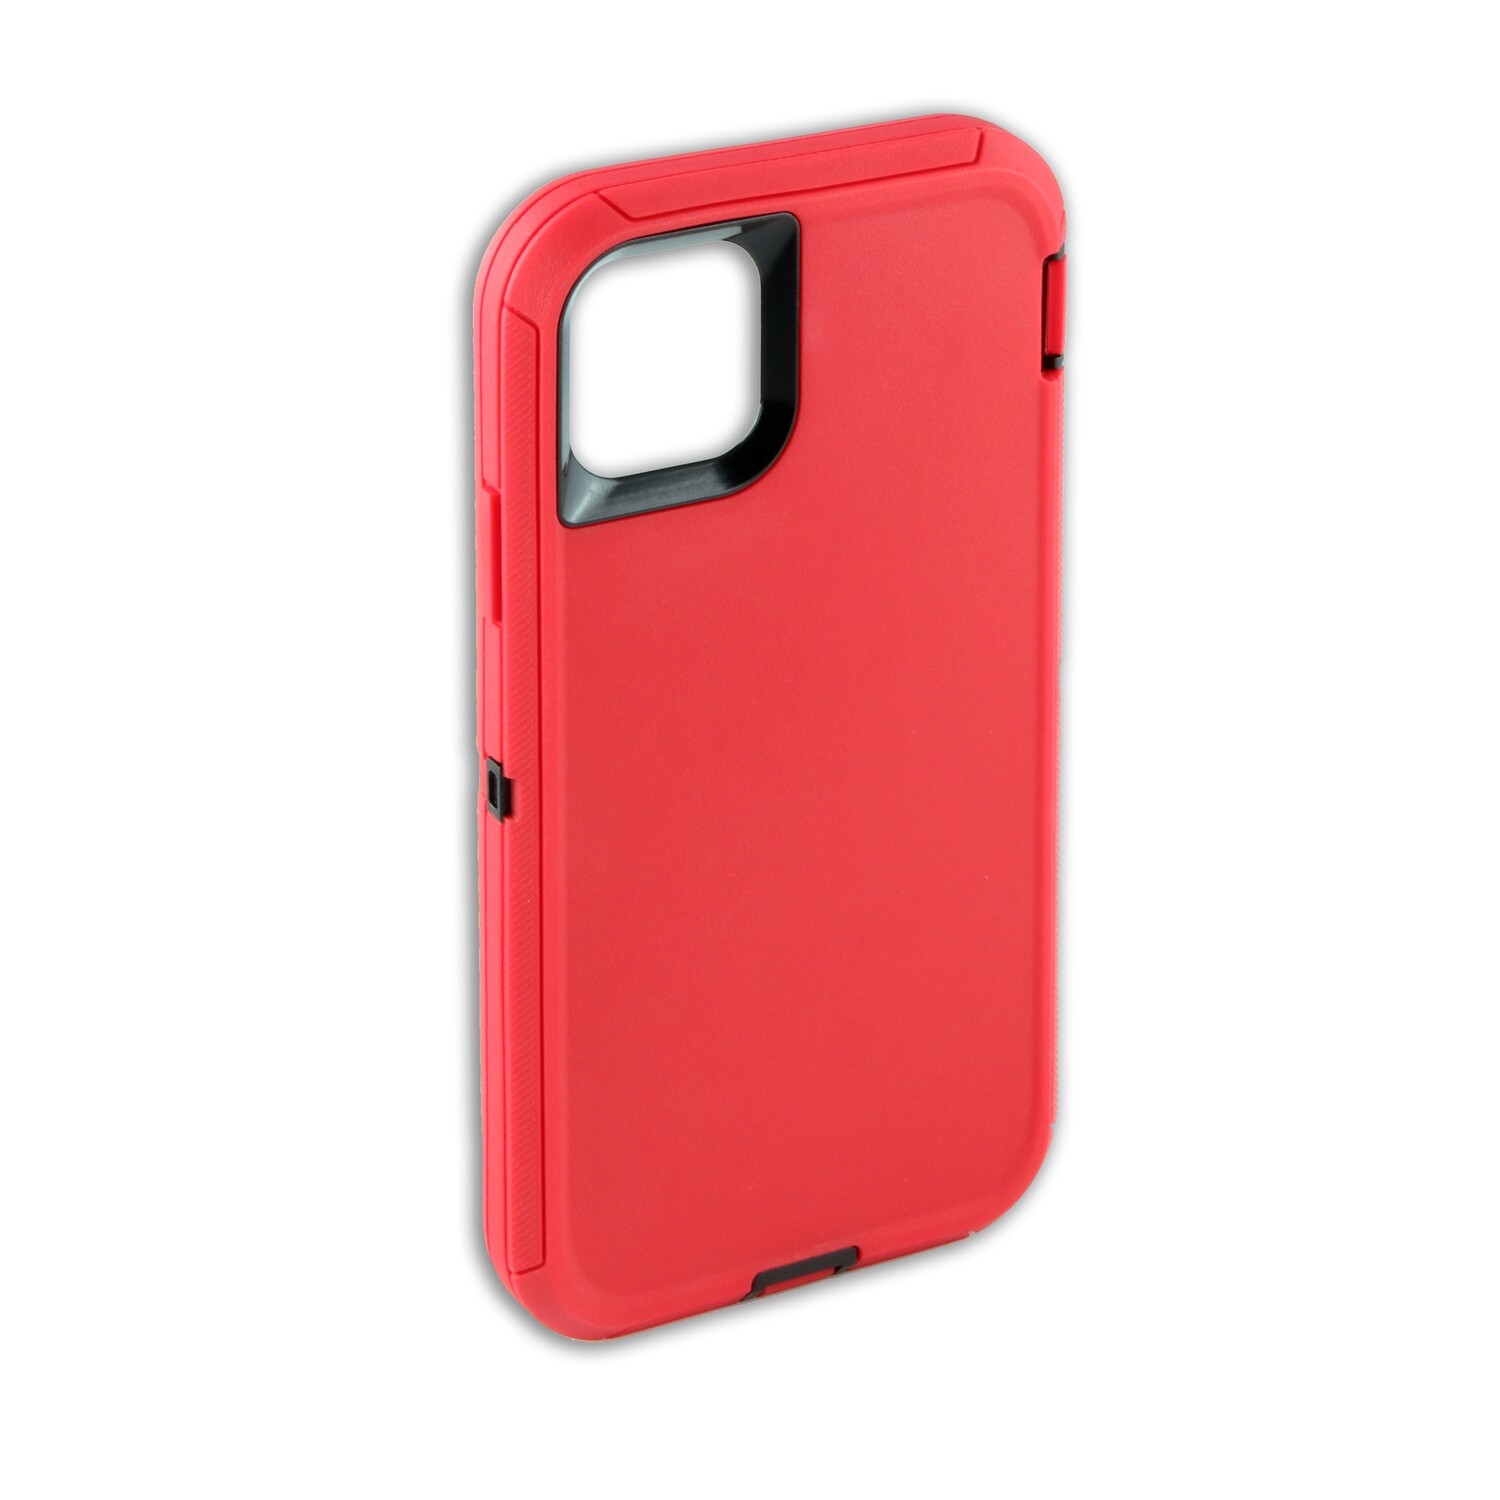 iPhone 11 Pro 5.8 Tough Guardian Robot ShockProof Case, Color: Red